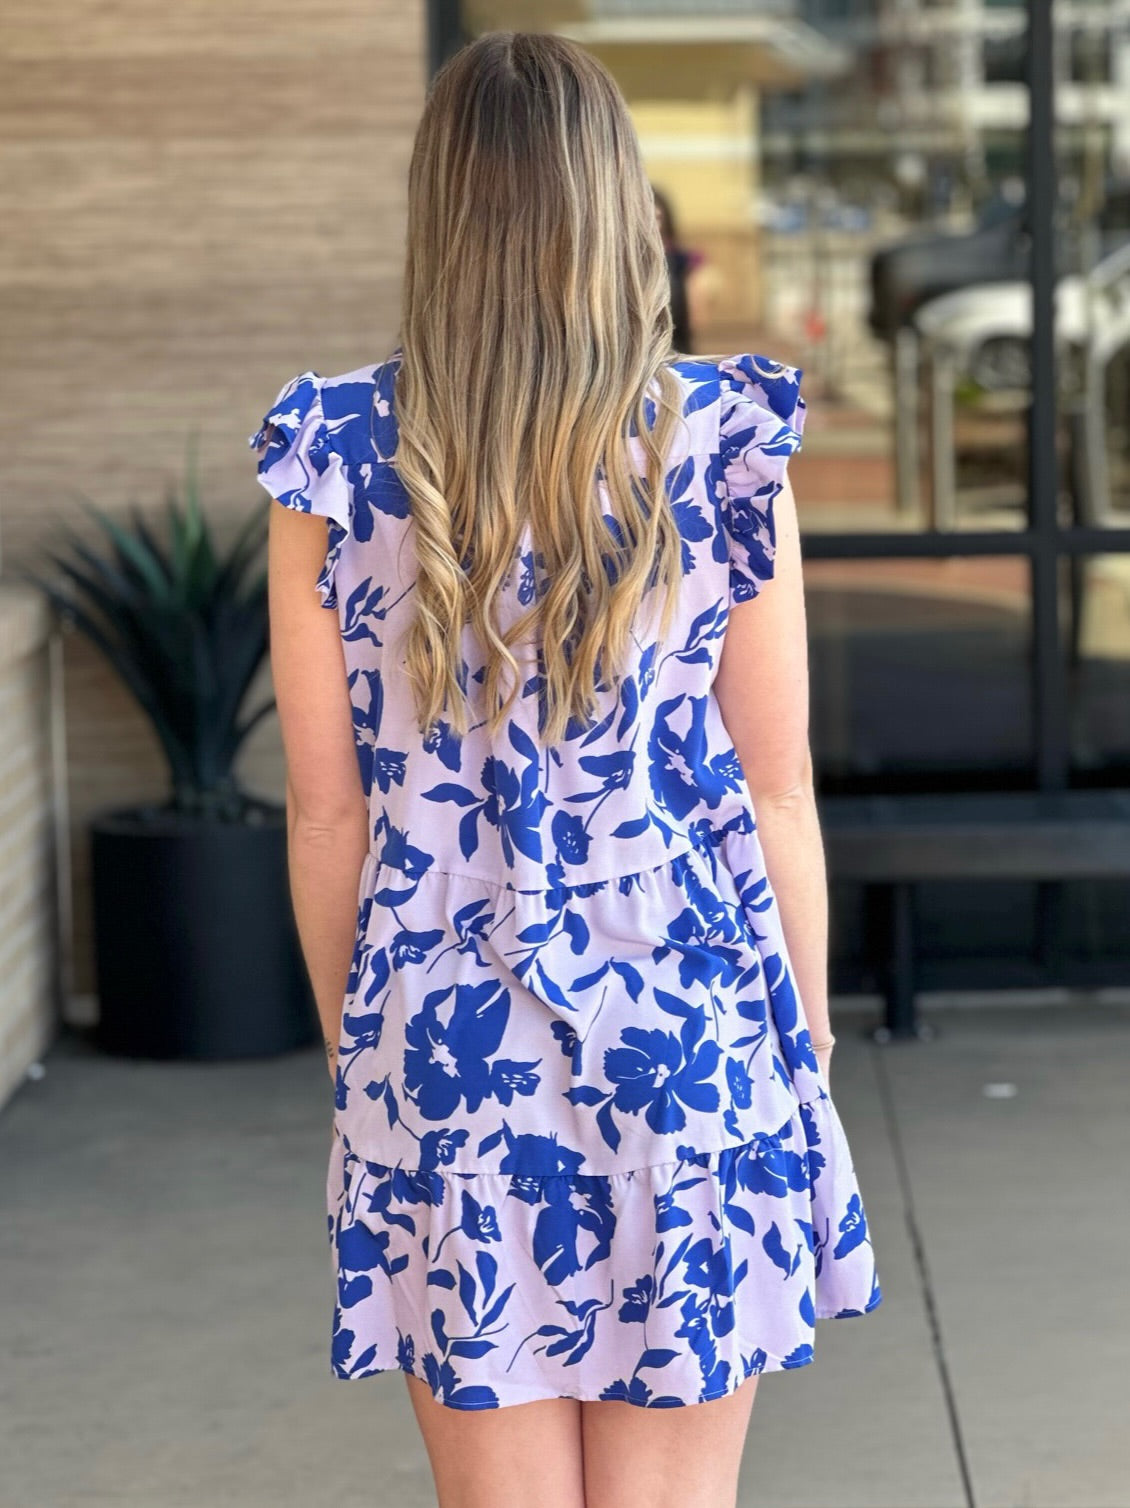 Lexi in lavender dress back view